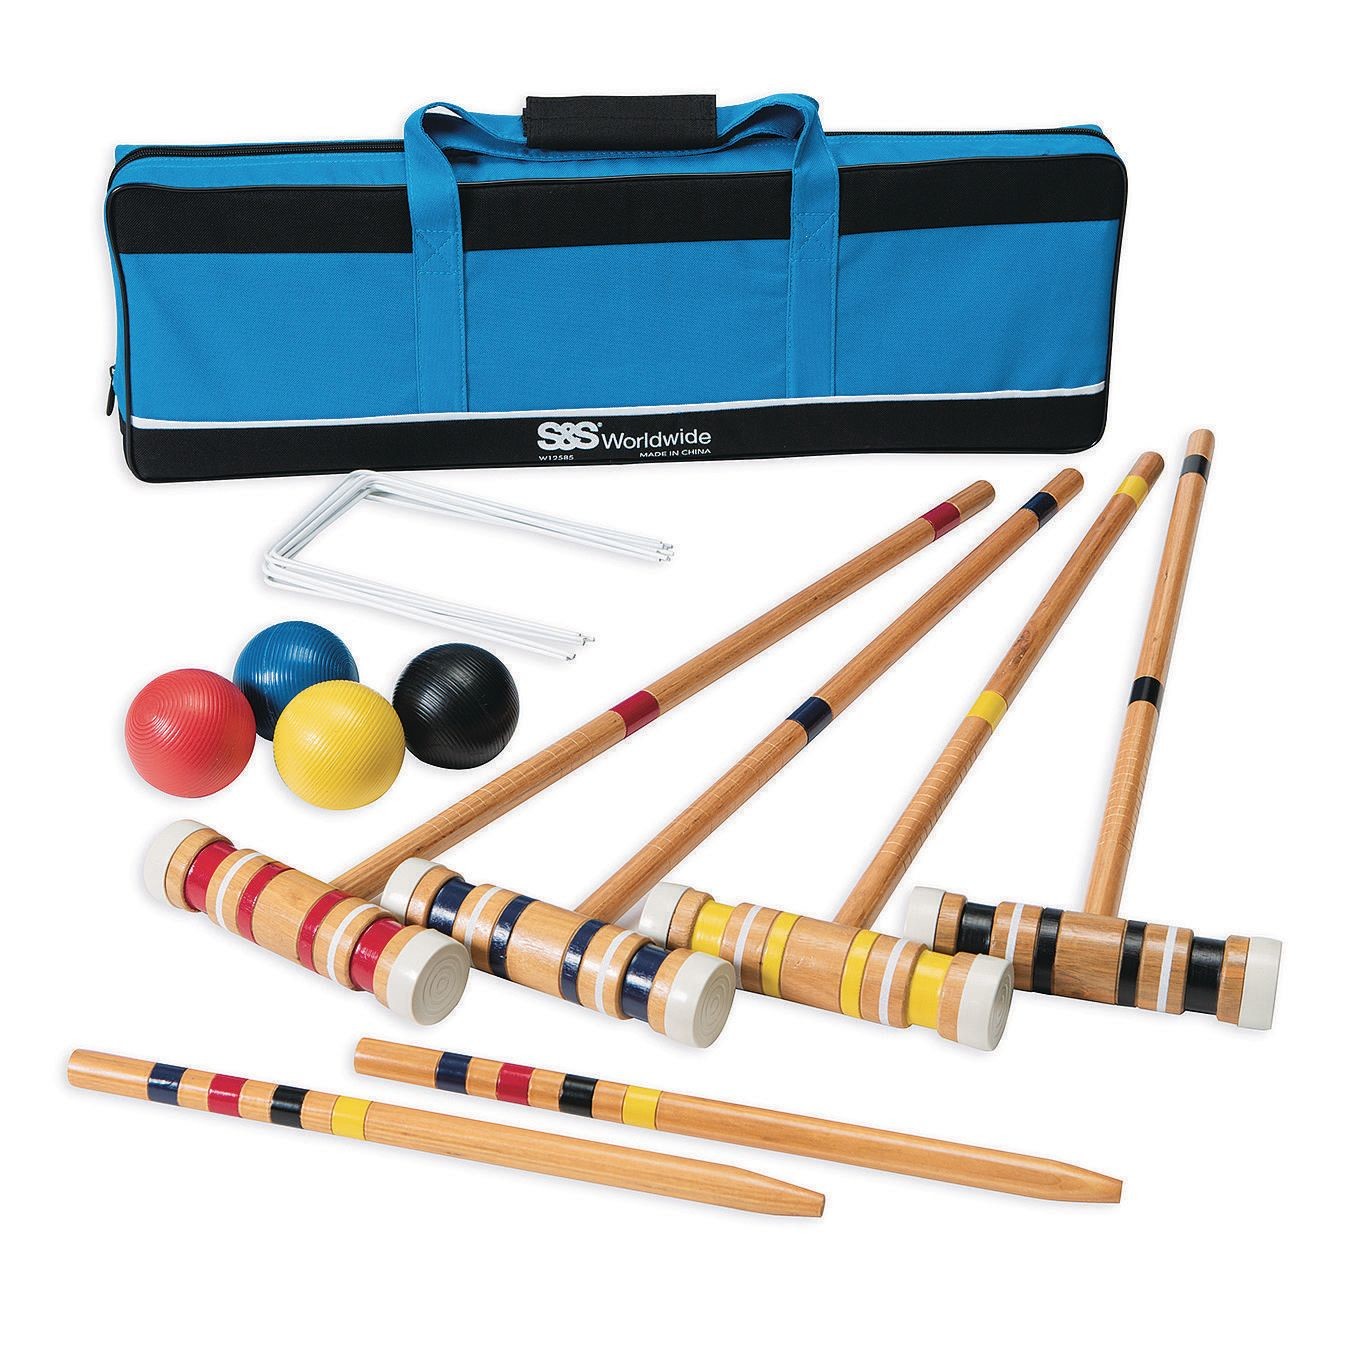 Buy Recreational 4-Player Croquet Set at S&S Worldwide